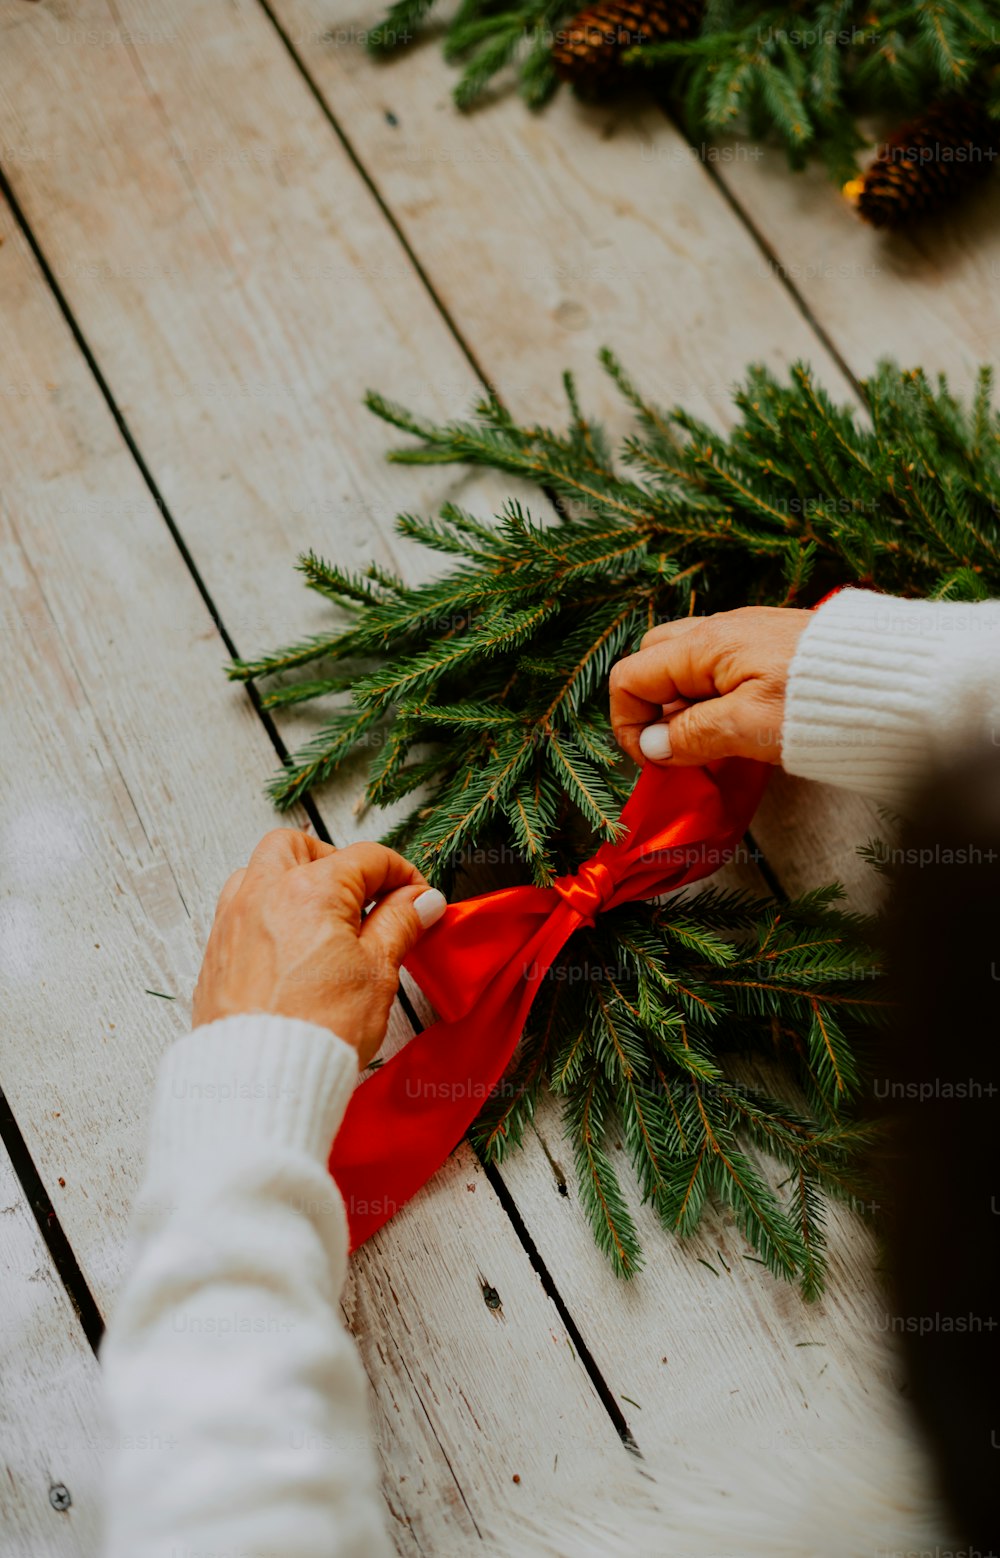 a person tying a red ribbon around a pine tree